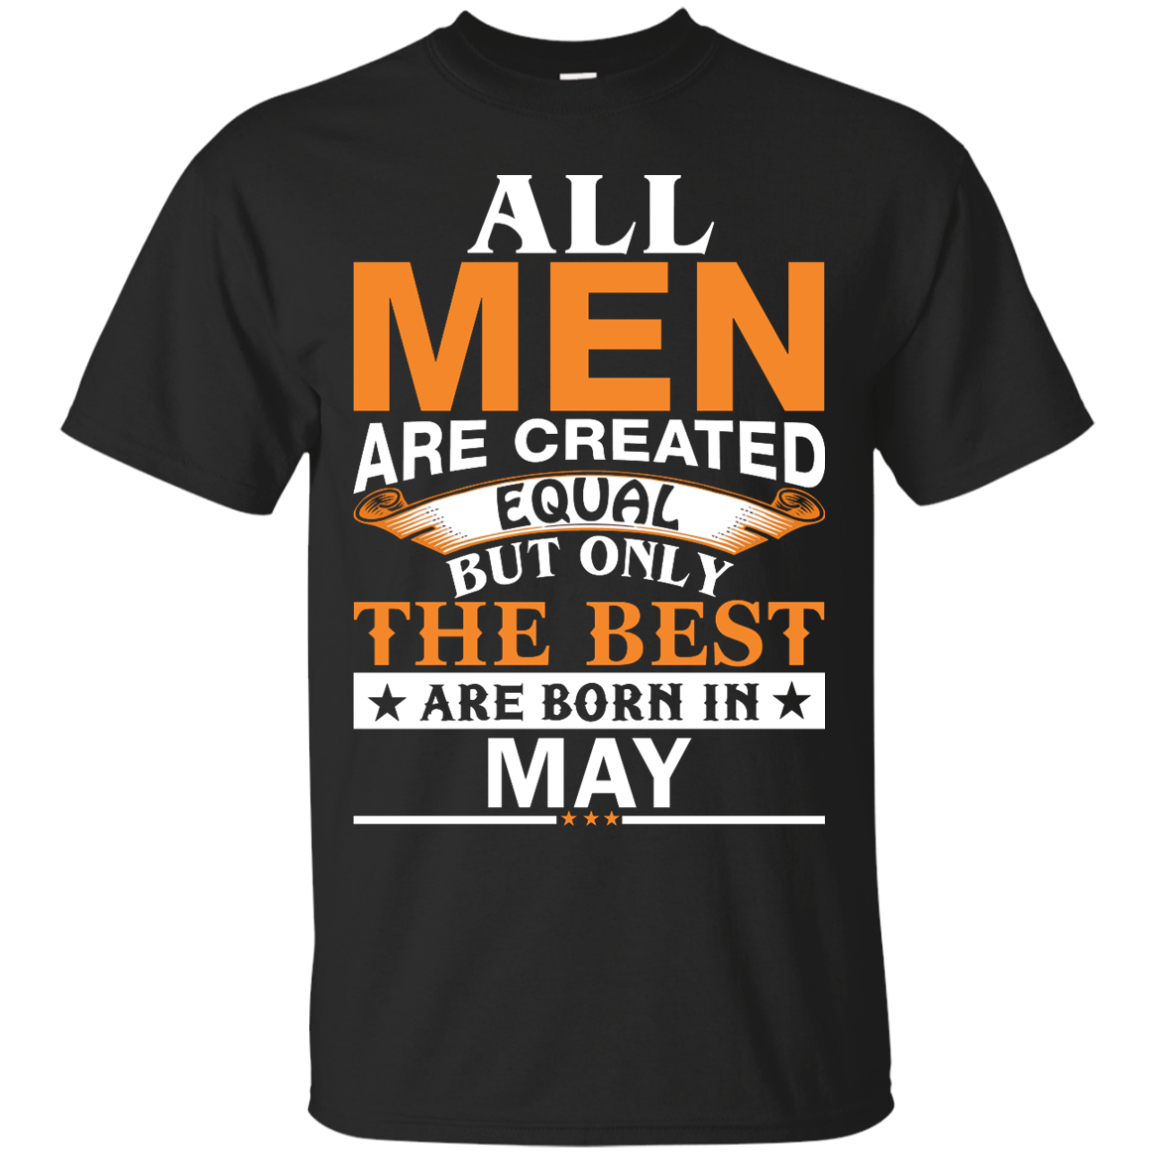 All Men Are Created Equal But Only The Best Are Born in May Shirt, Hoodie